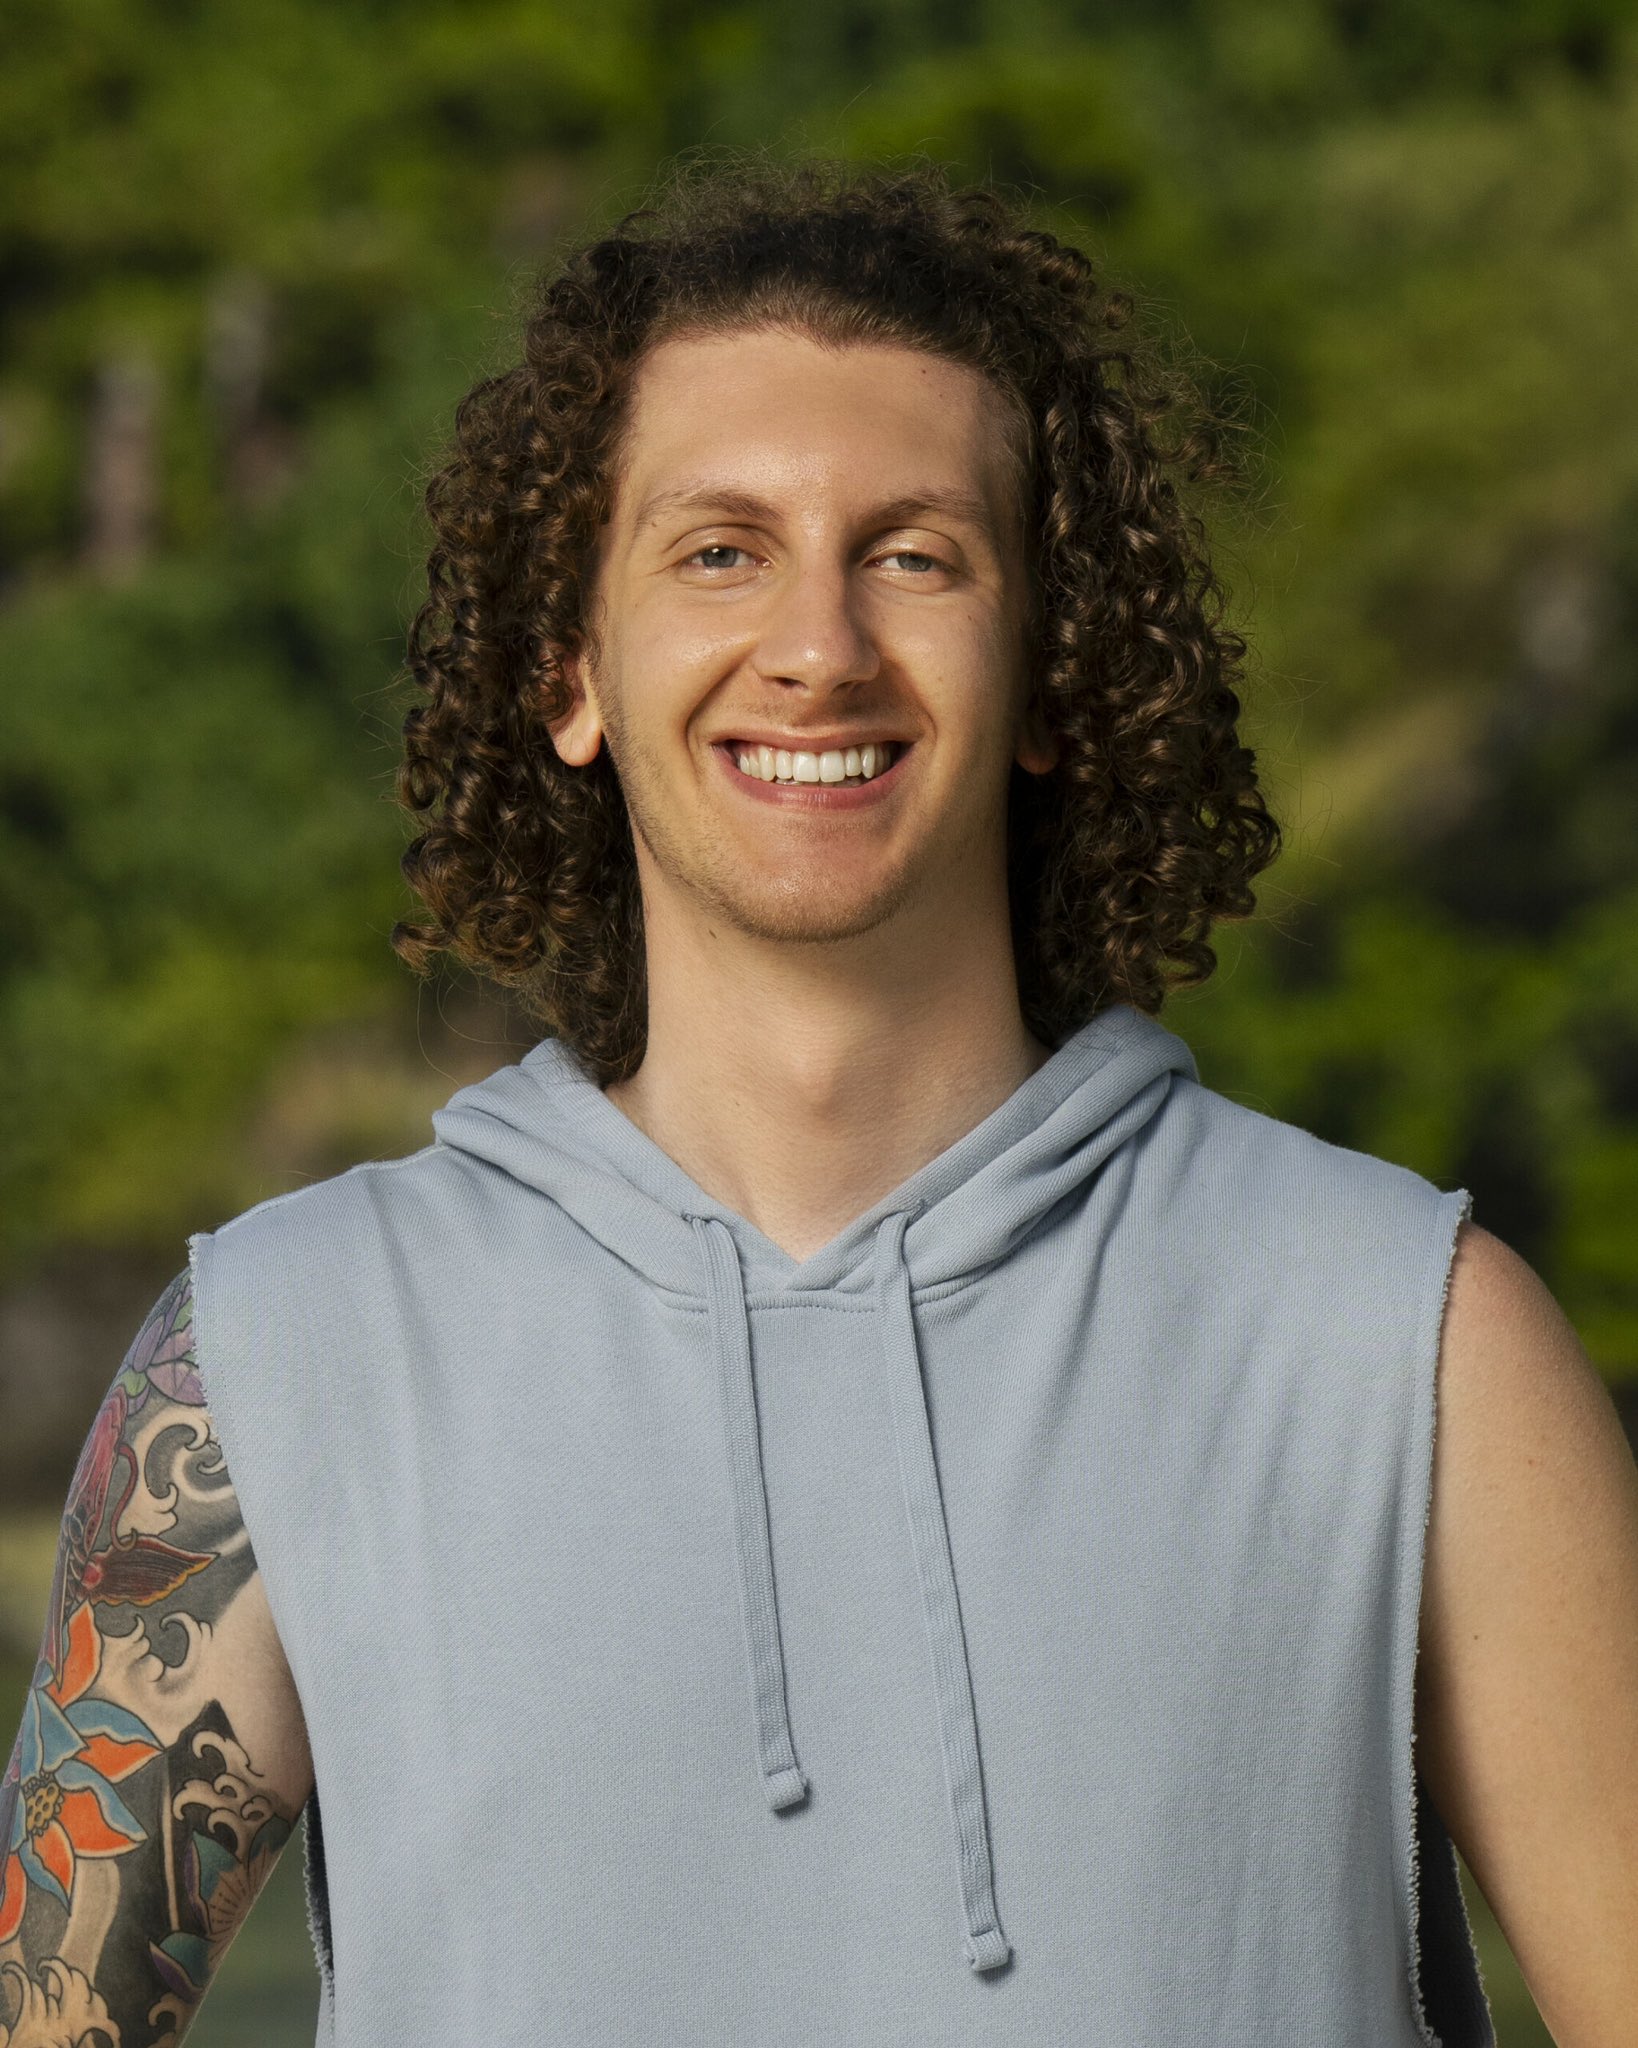 SurvivorQuotesX on X: The couples fight between Jon and Jaclyn